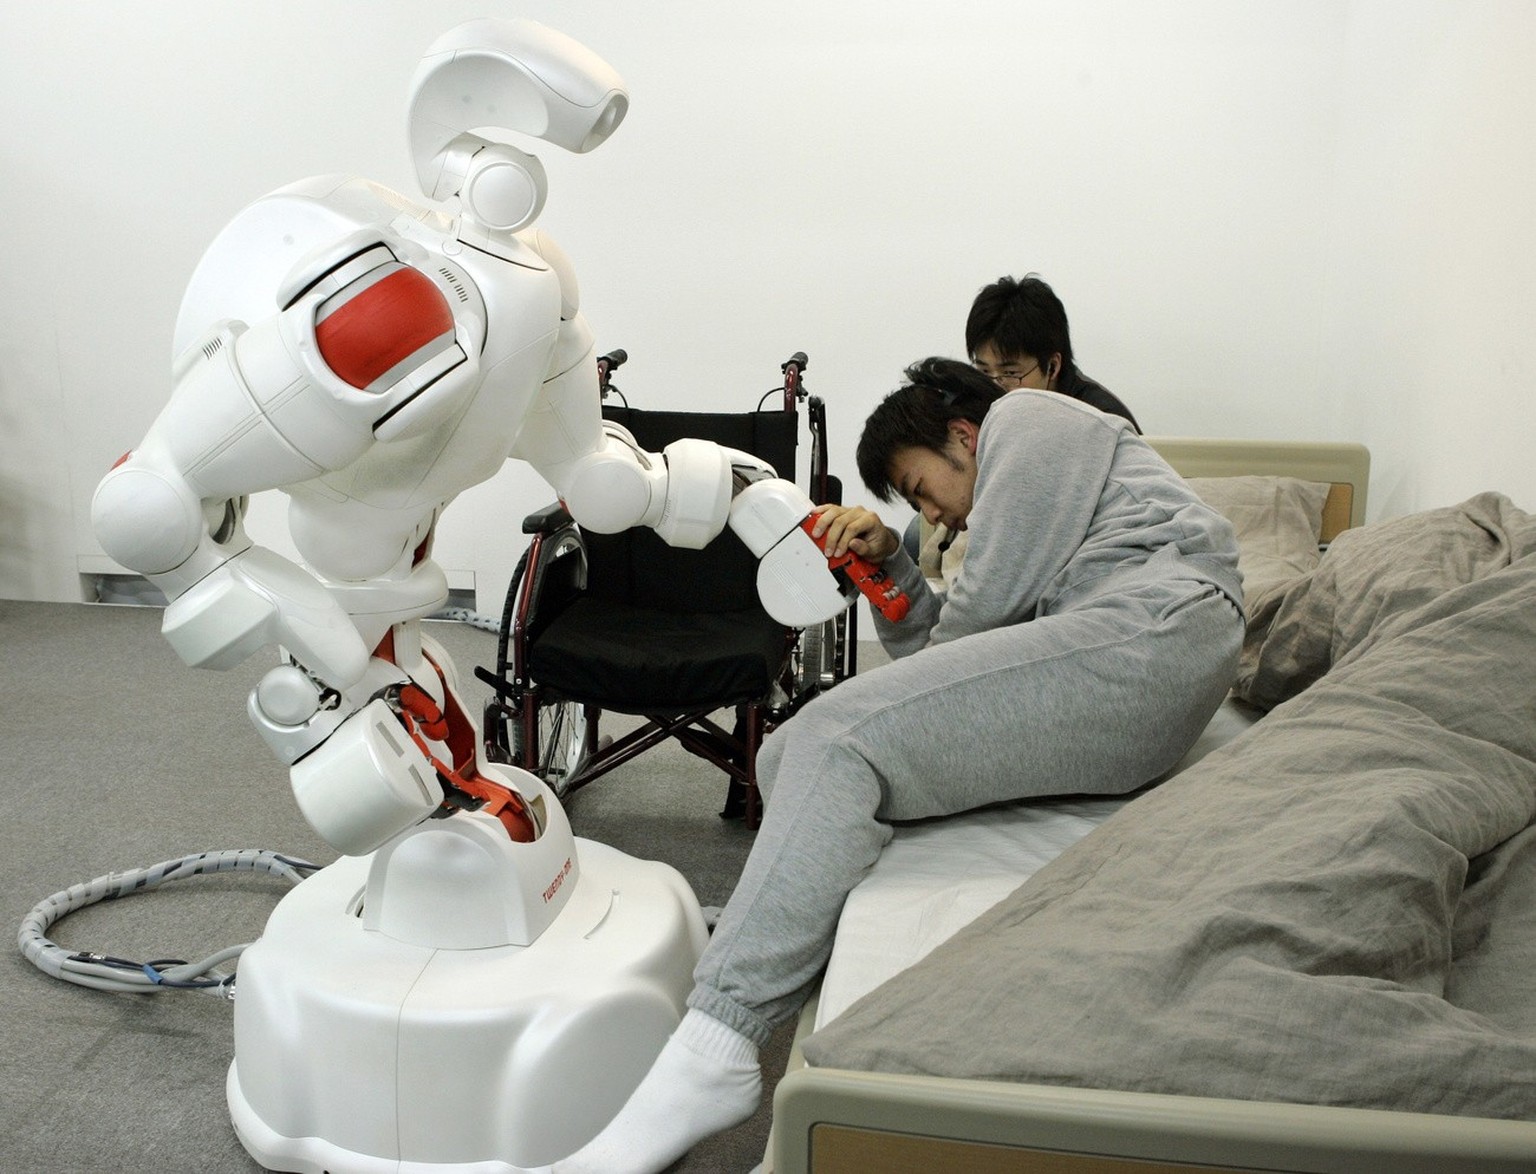 Humanoid robot Twendy-One gives a hand to assist Waseda University student Genki Fujii to move from his bed to a wheelchair during a demonstration of the robot designed to be safe to take care of elde ...